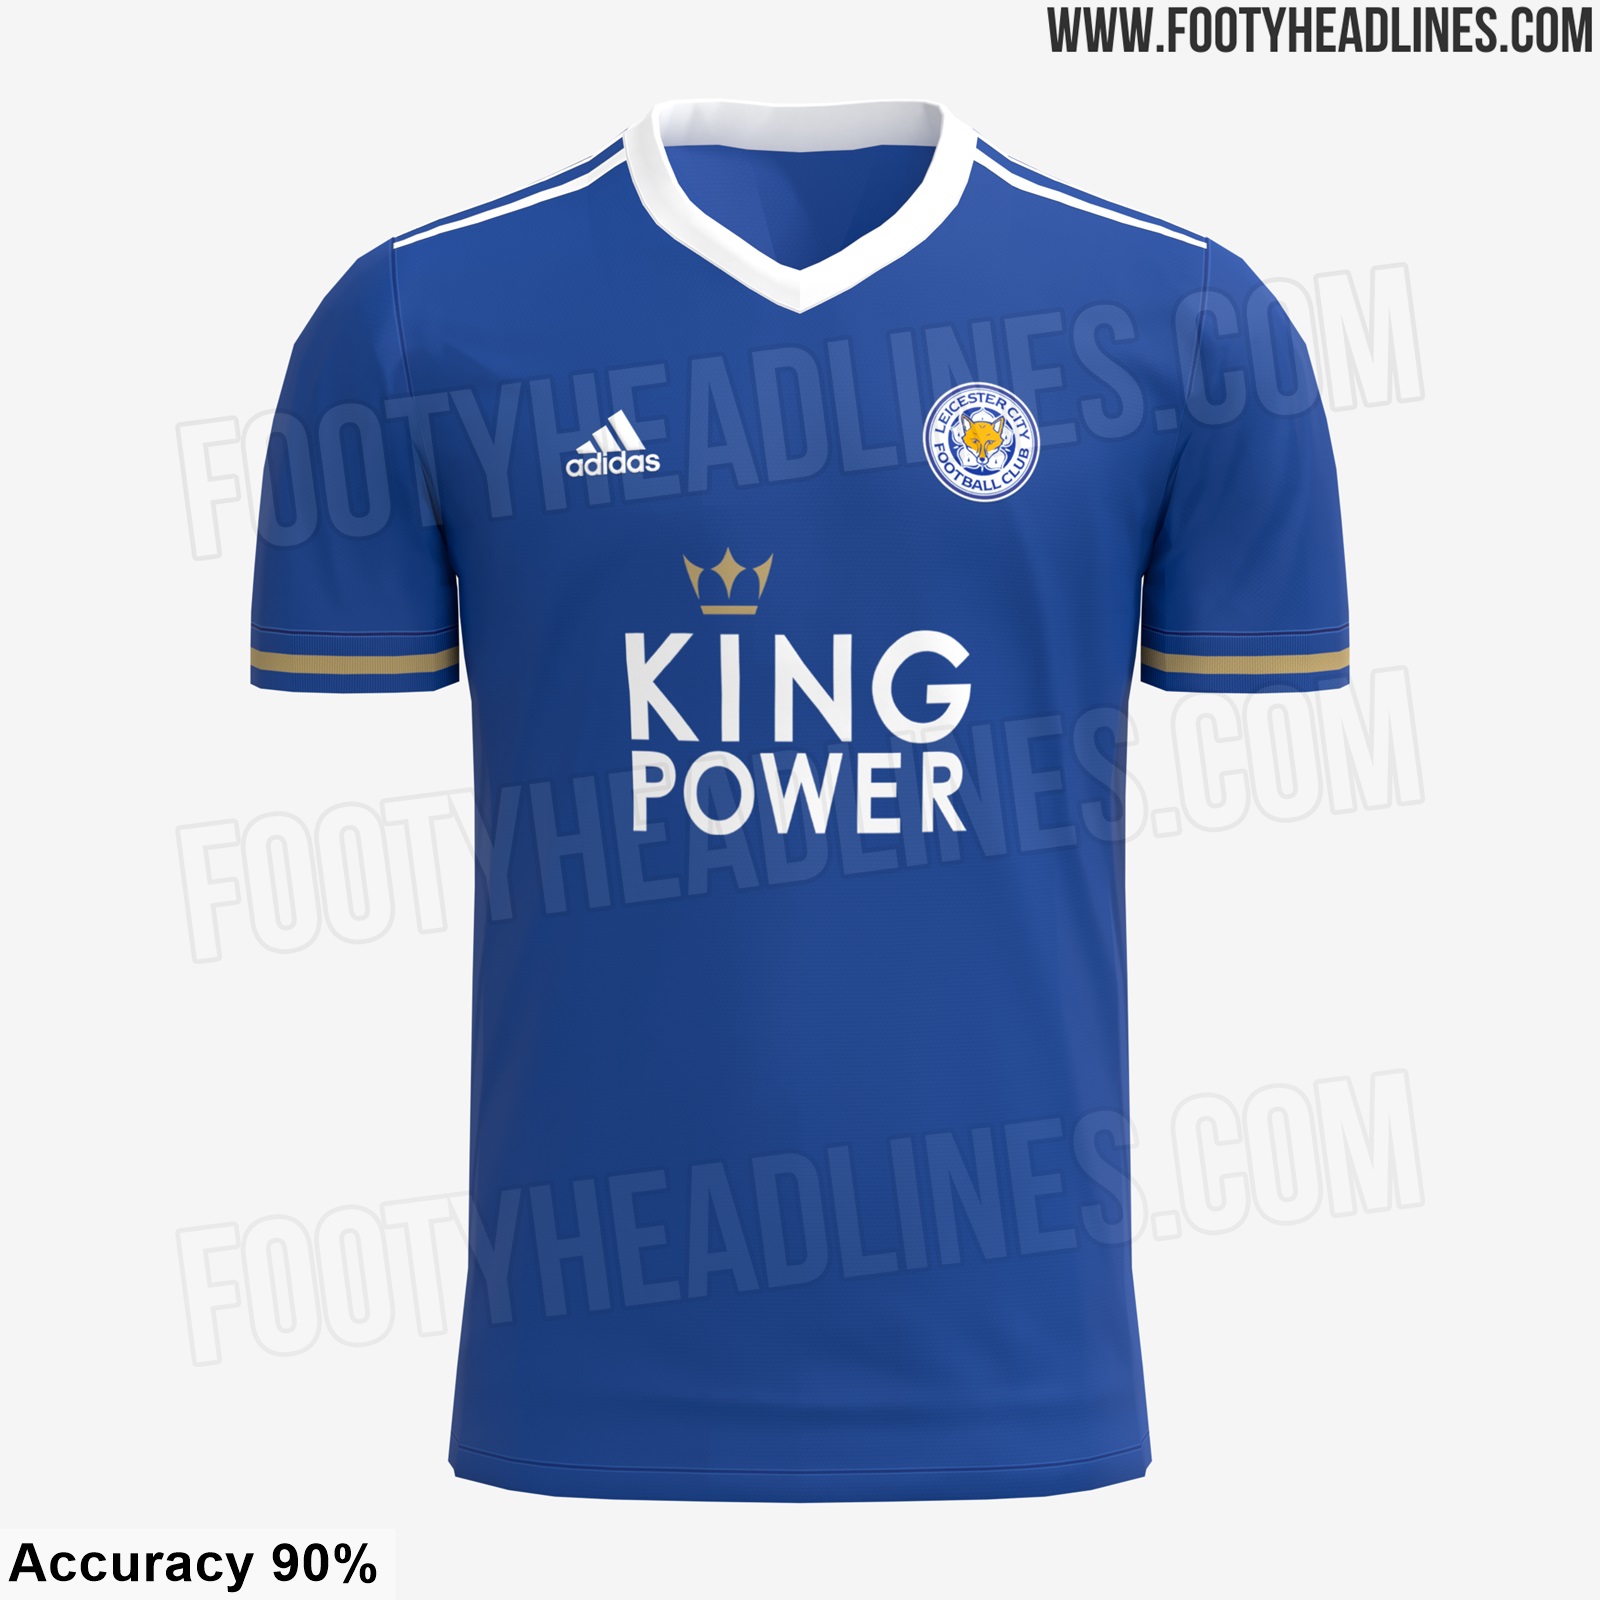 Leicester City 21-22 Home Kit Leaked - Footy Headlines